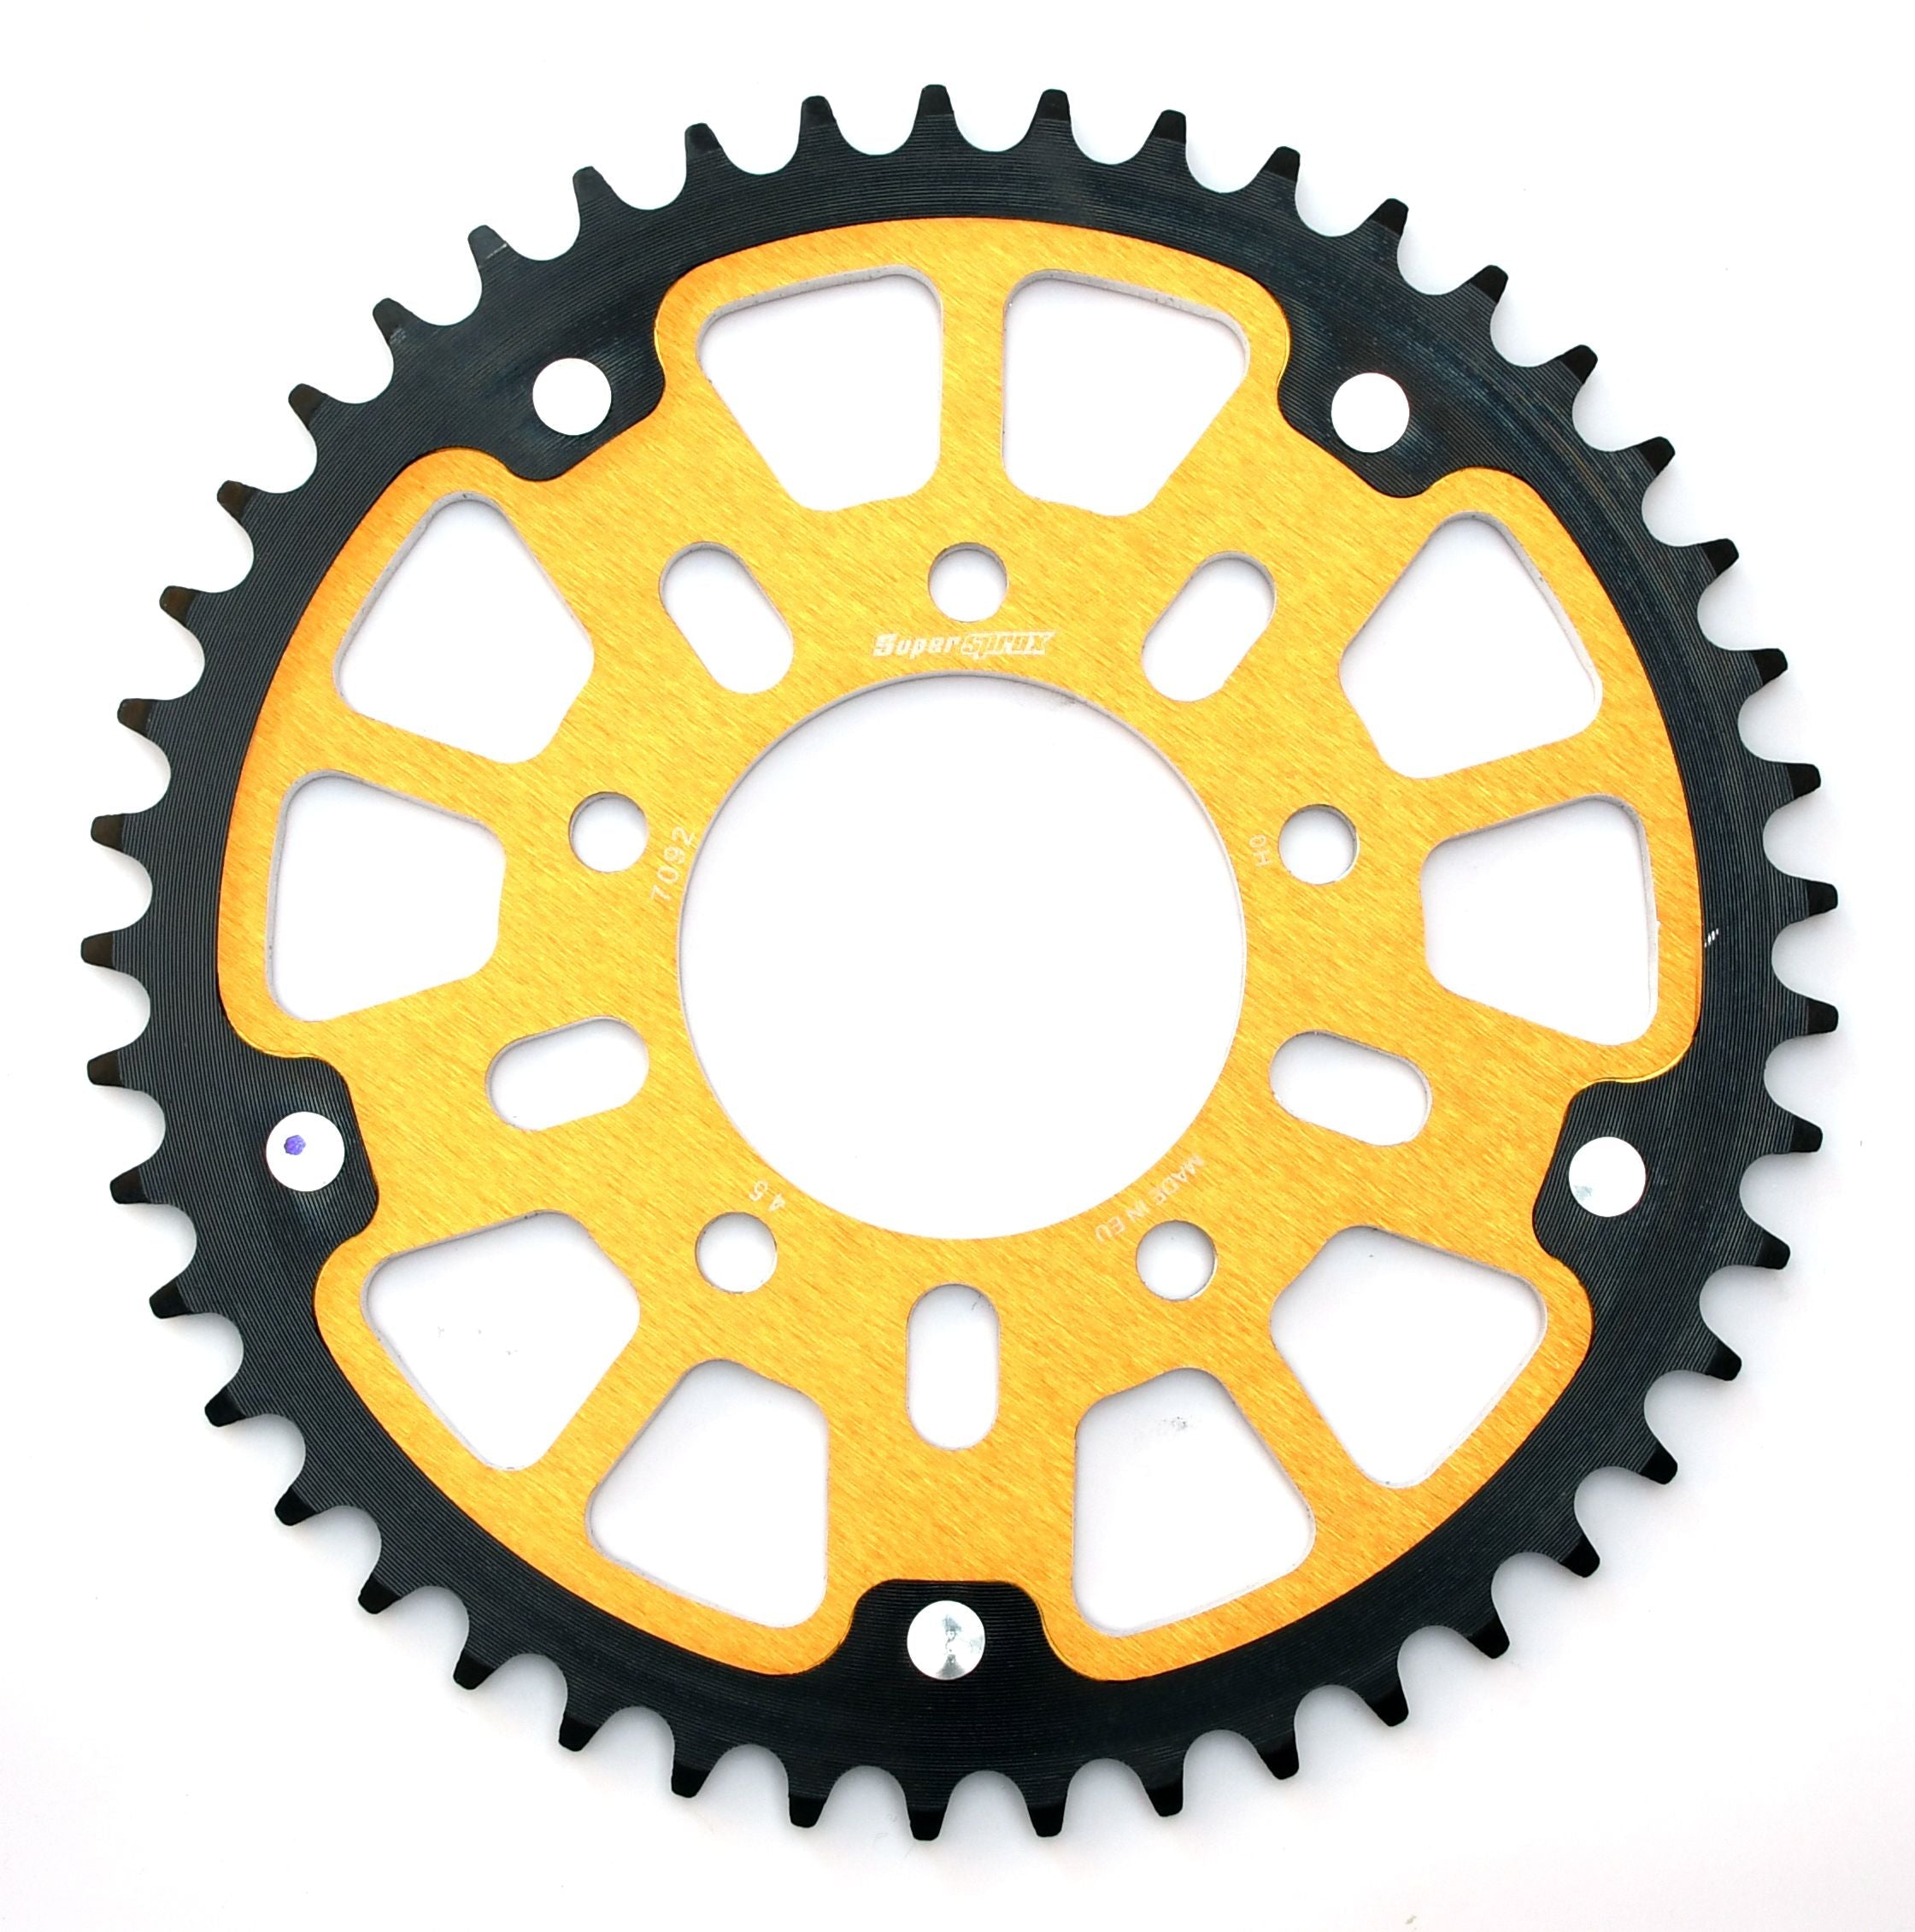 Supersprox Stealth 525 Pitch Rear Sprocket RST-7092:47 - (525, 76mm Centre, 100mm PCD)